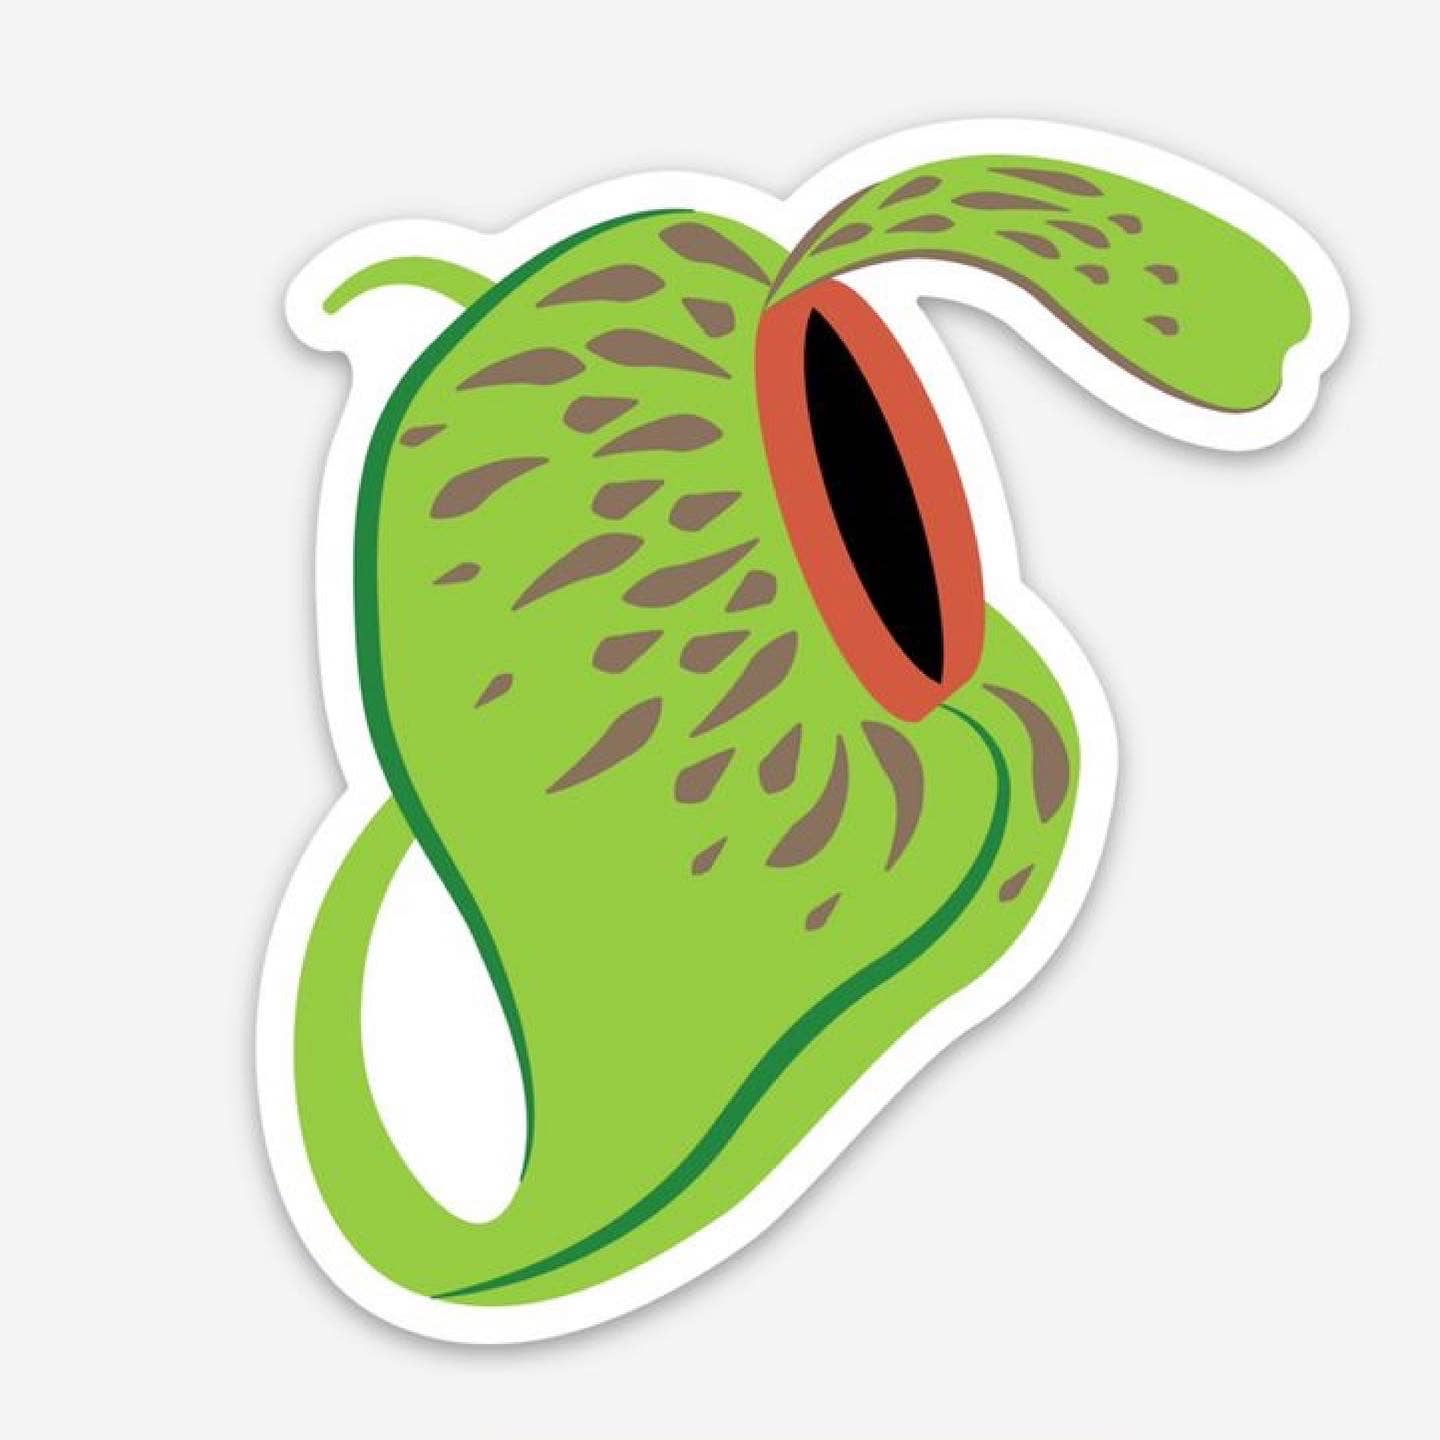 A sticker of a Nepenthes aristolochioides plant